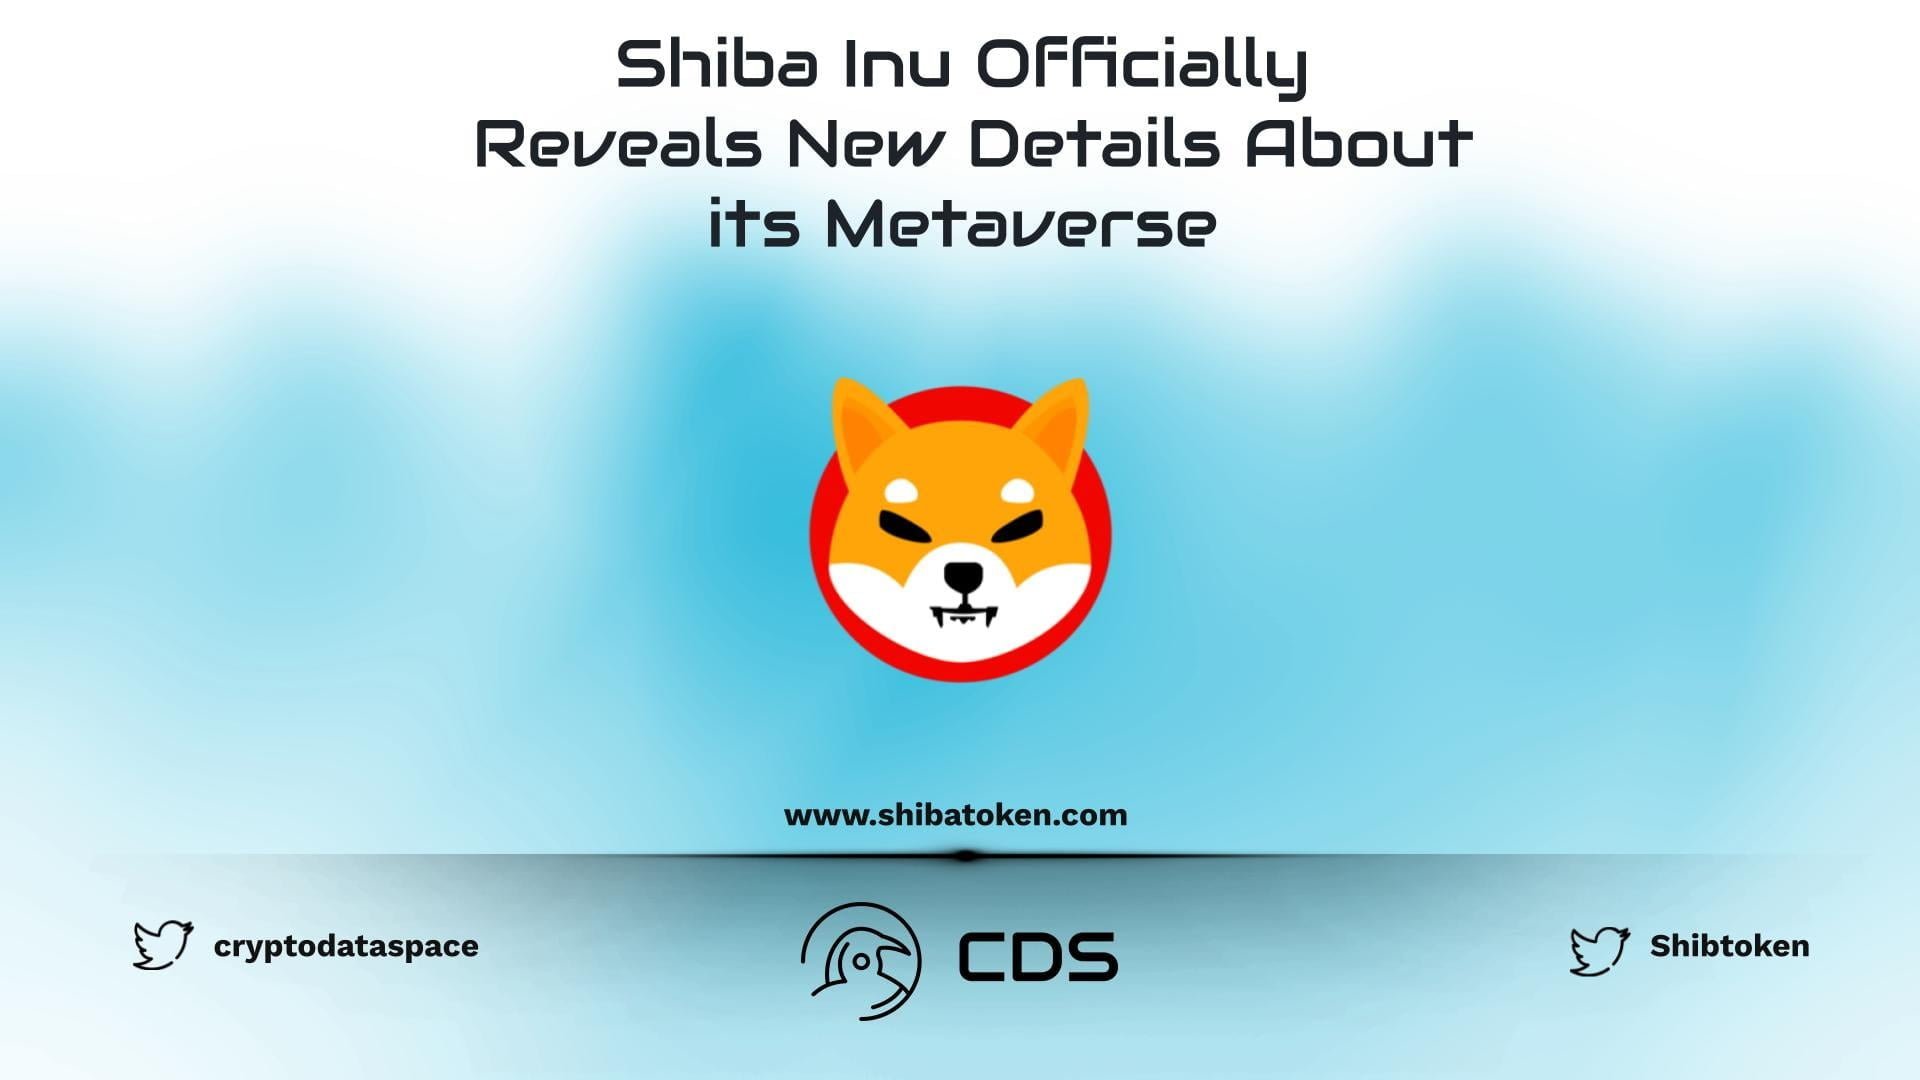 Shiba Inu Officially Reveals New Details About its Metaverse